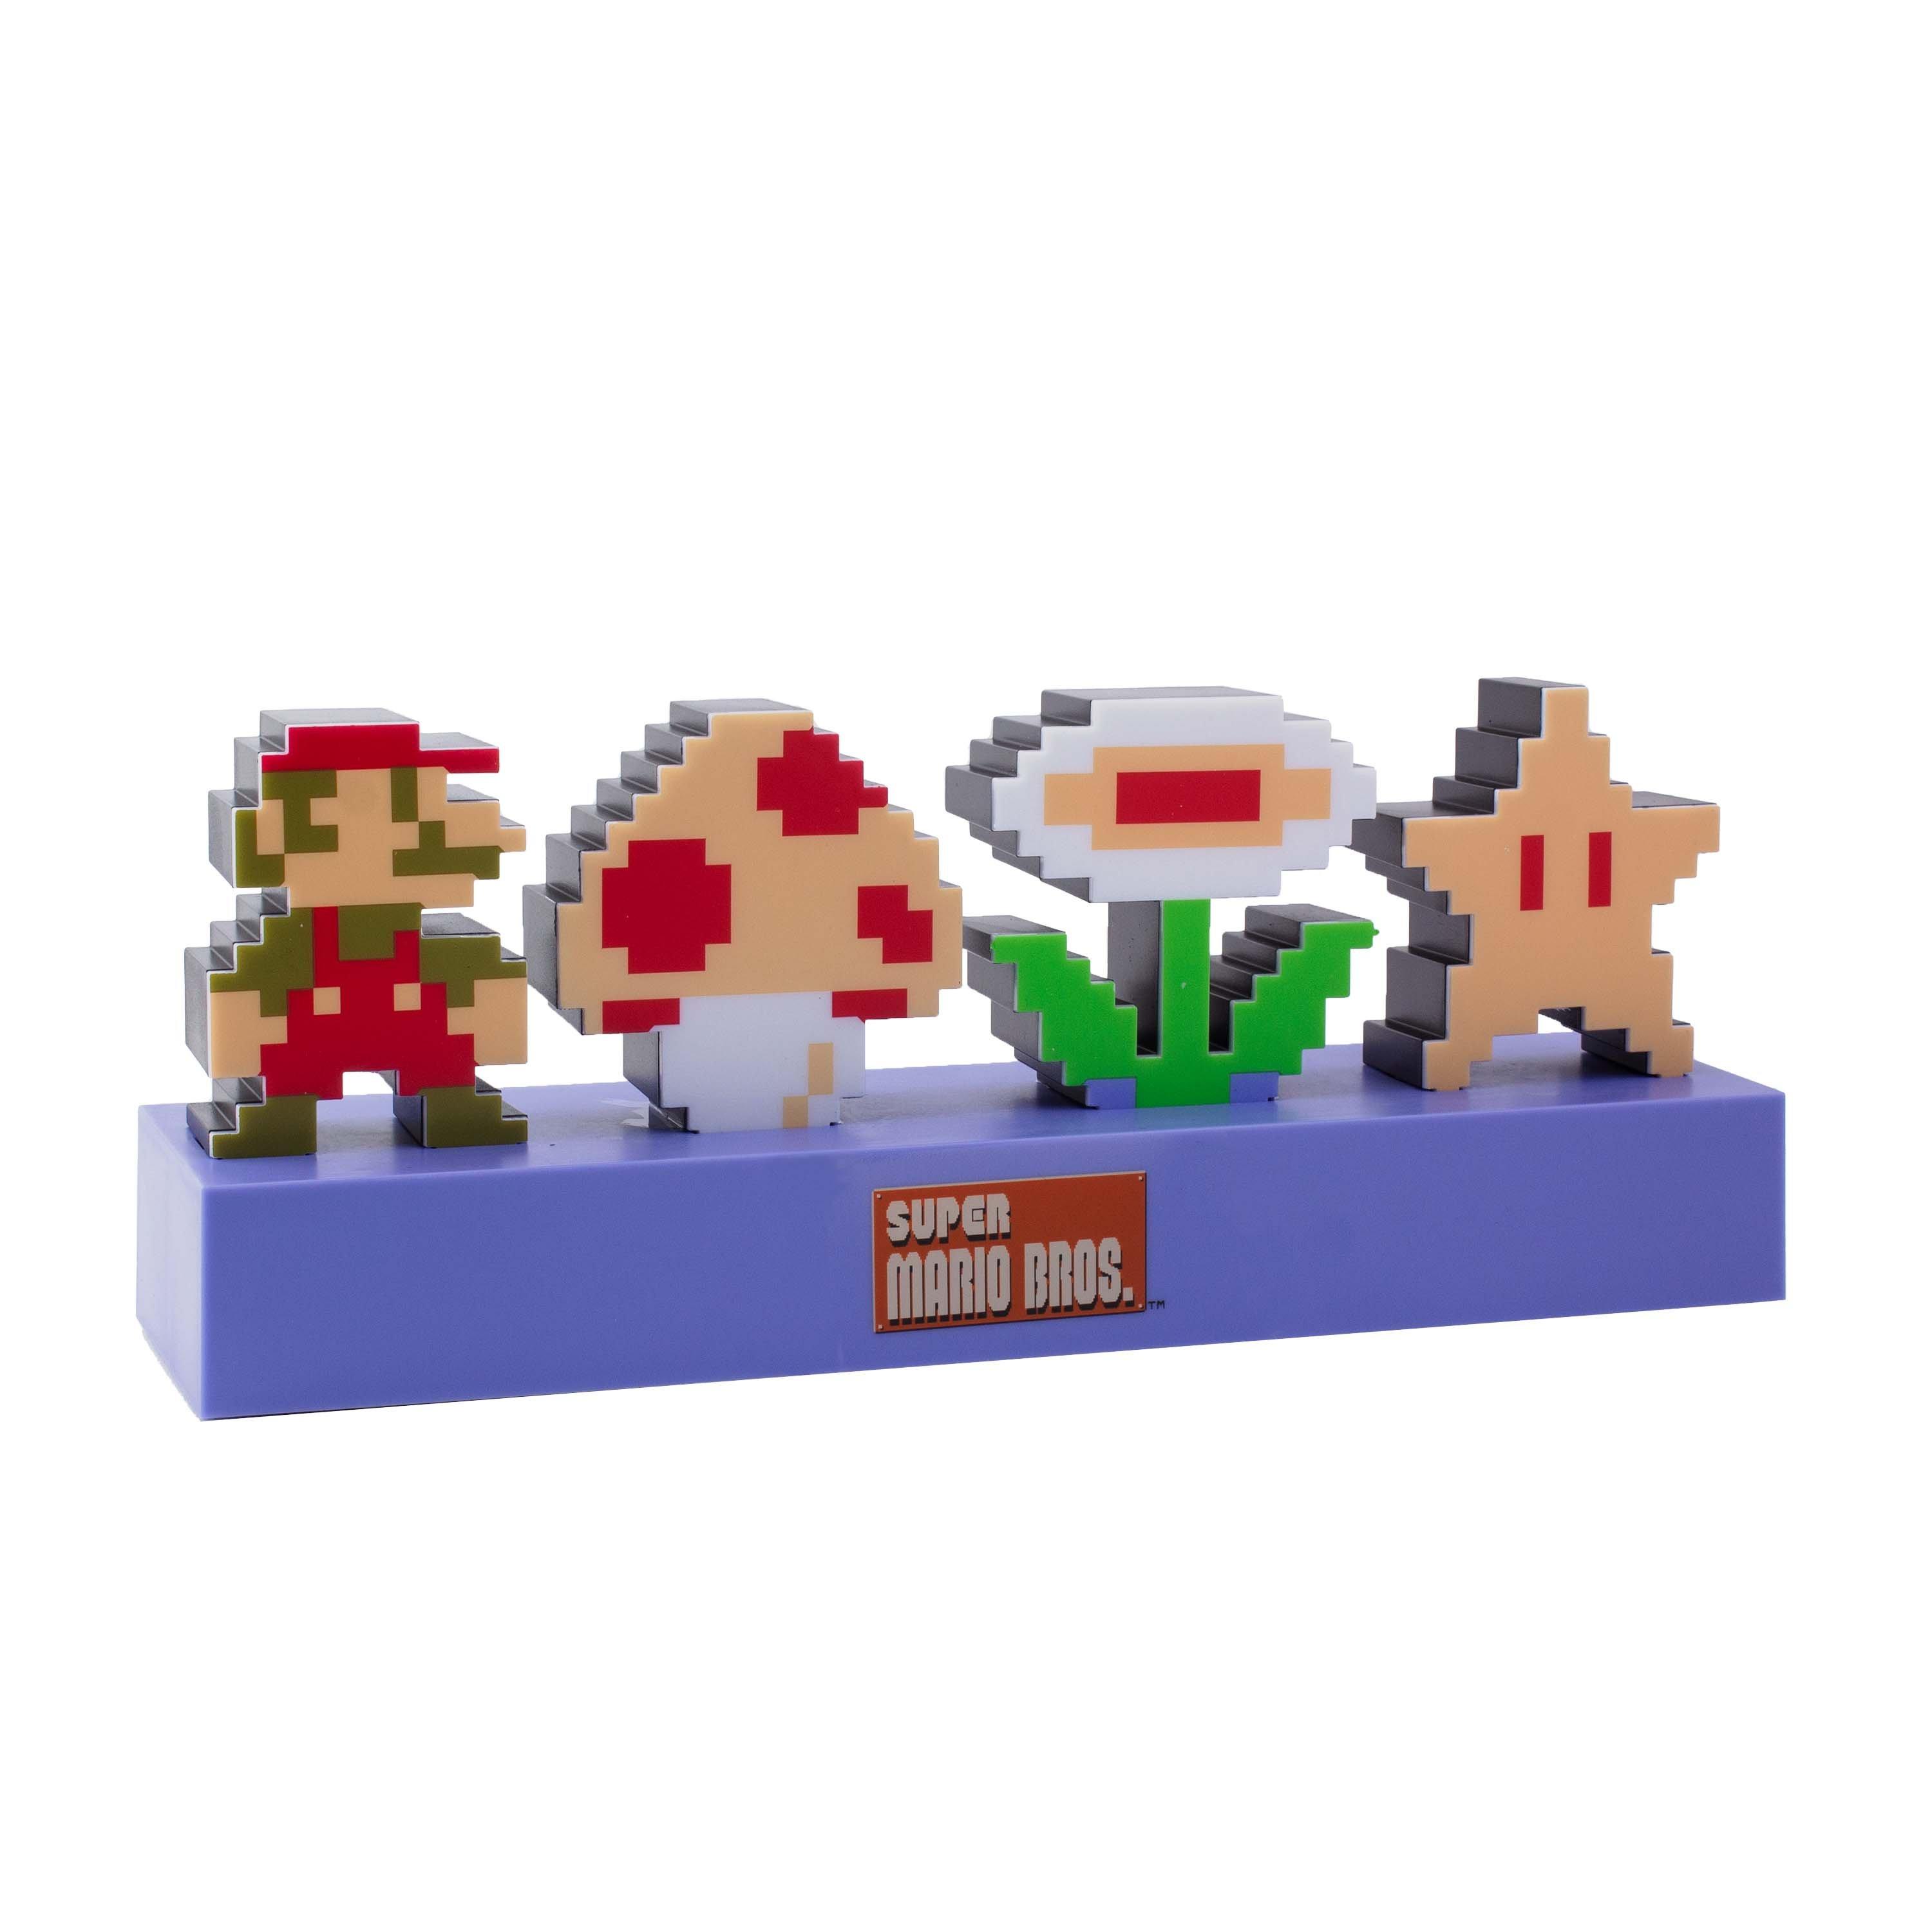 Super Mario™ Toys and Gifts